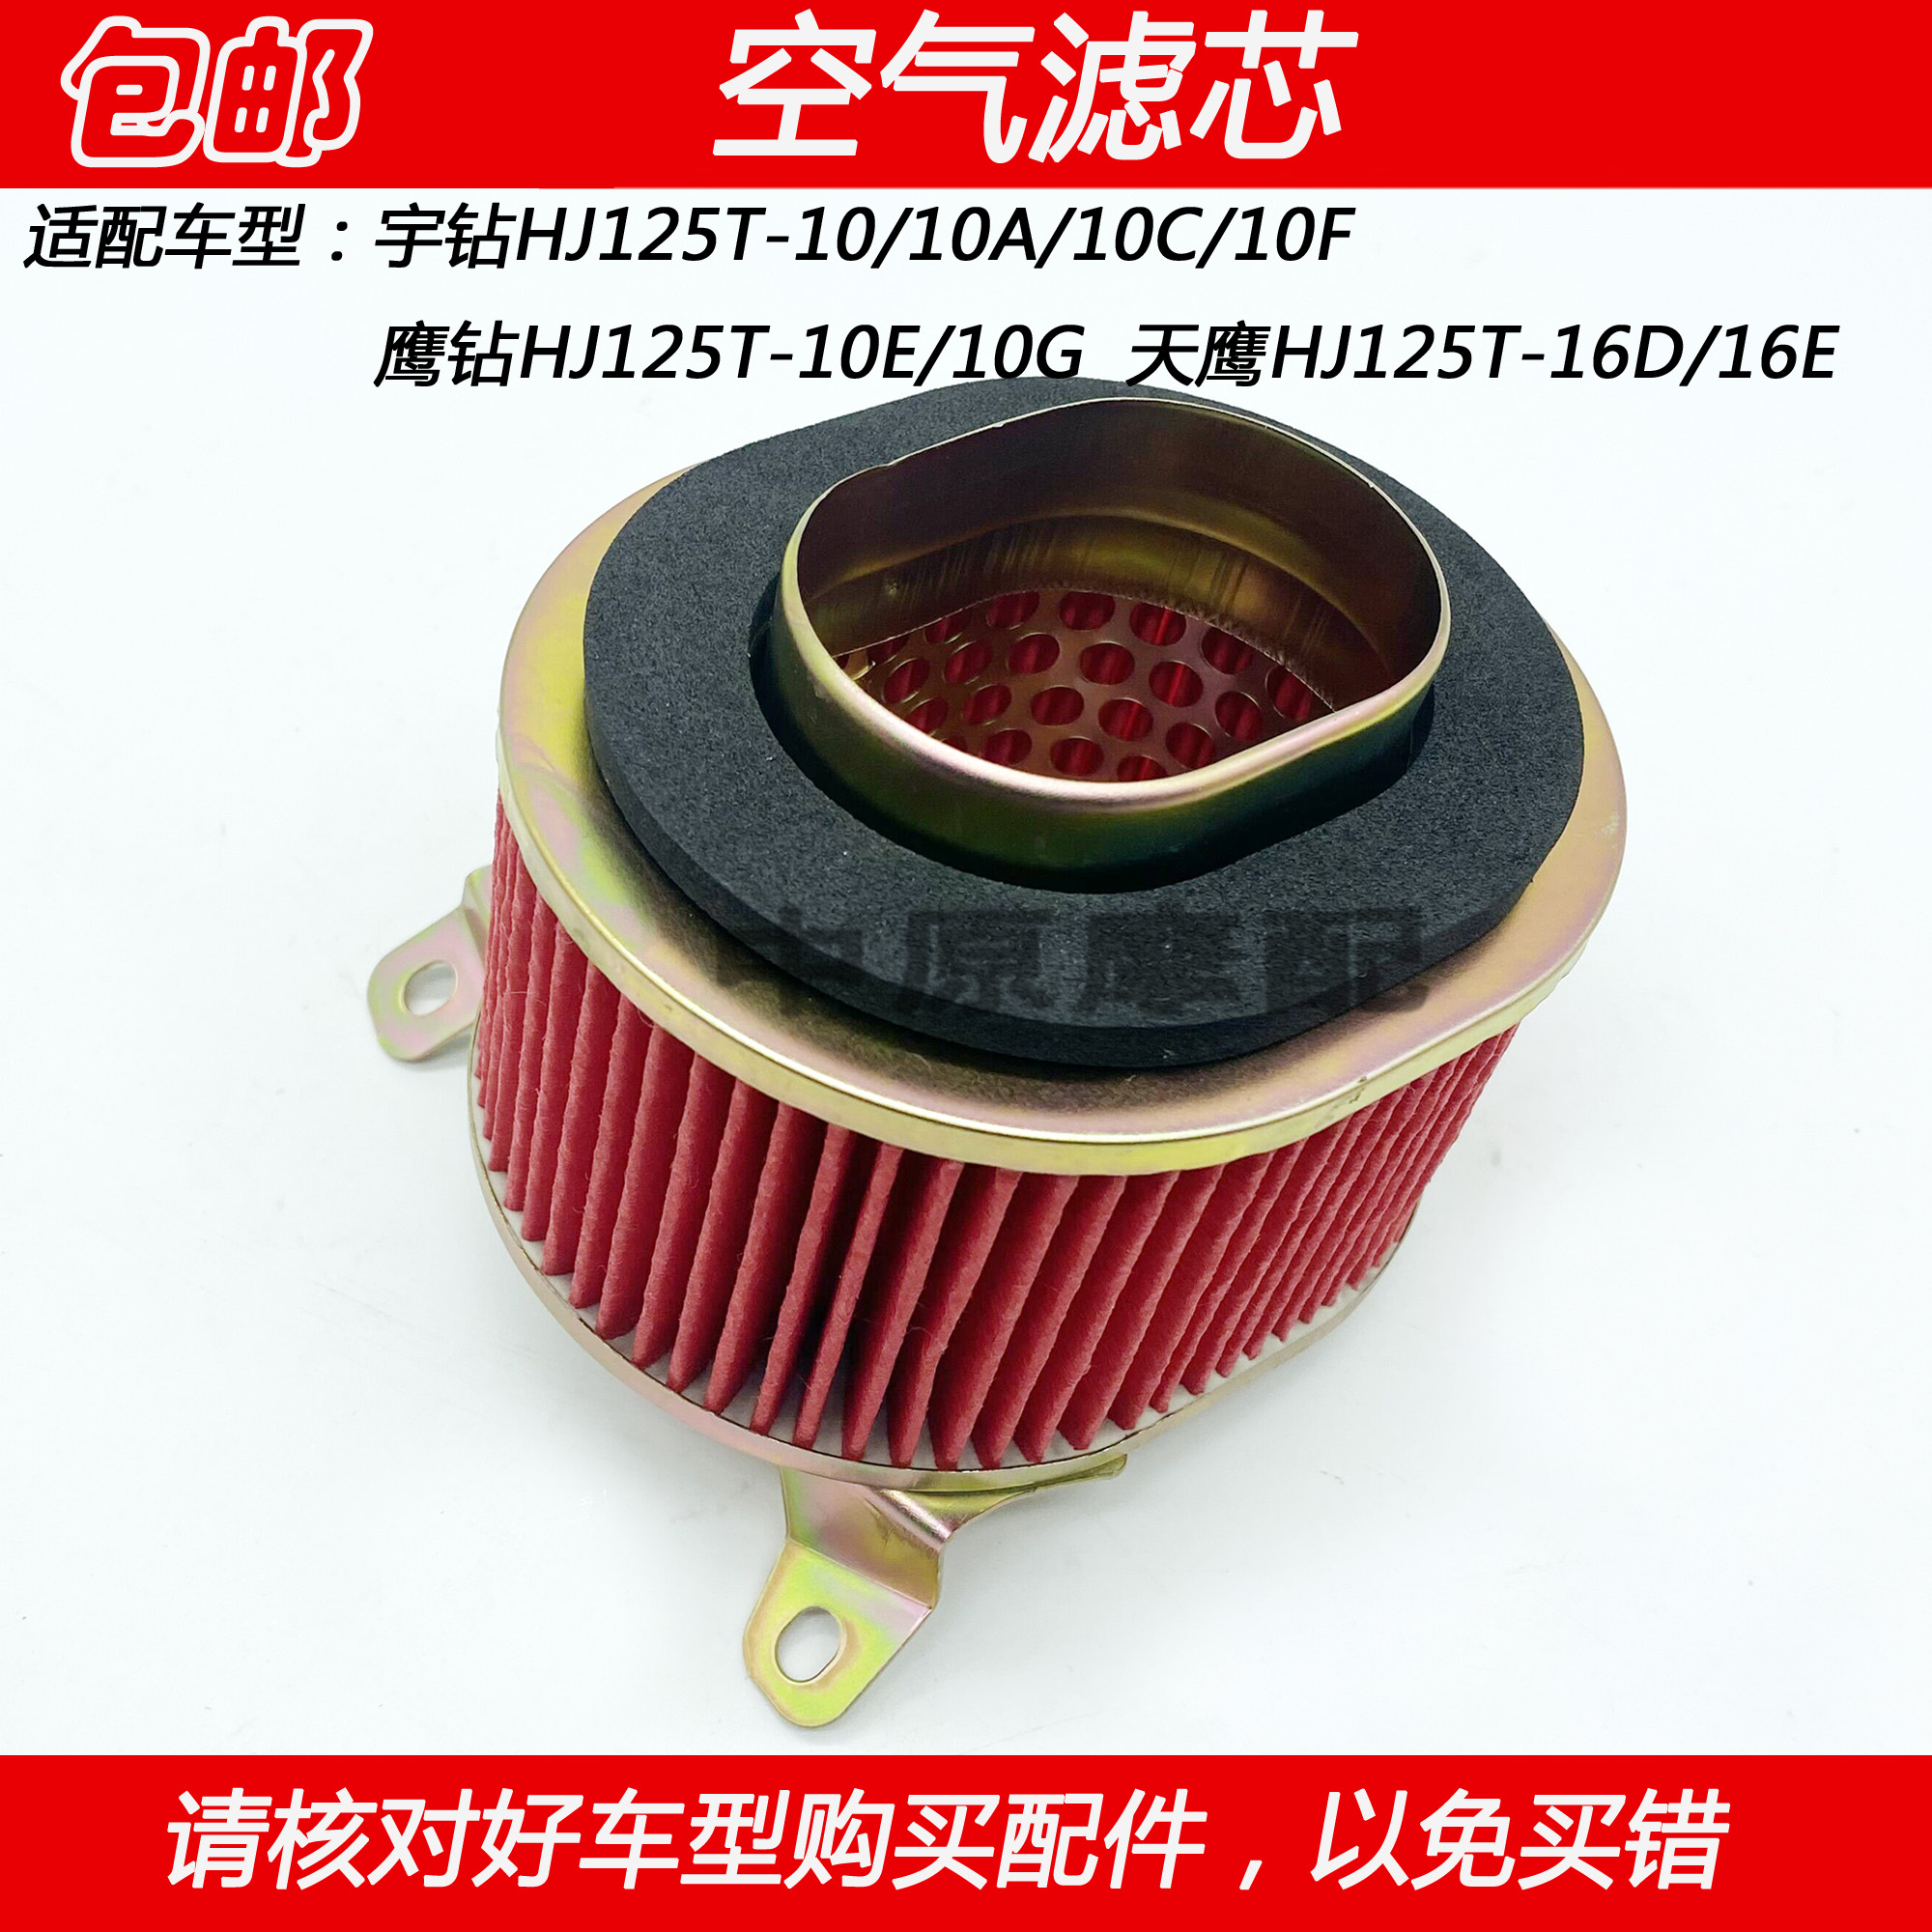 Adapted to Haojue Tianying Eagle Drill Space Drill HJ125T-10A 10C 10E 10G 16D E Air Filter Air Filter